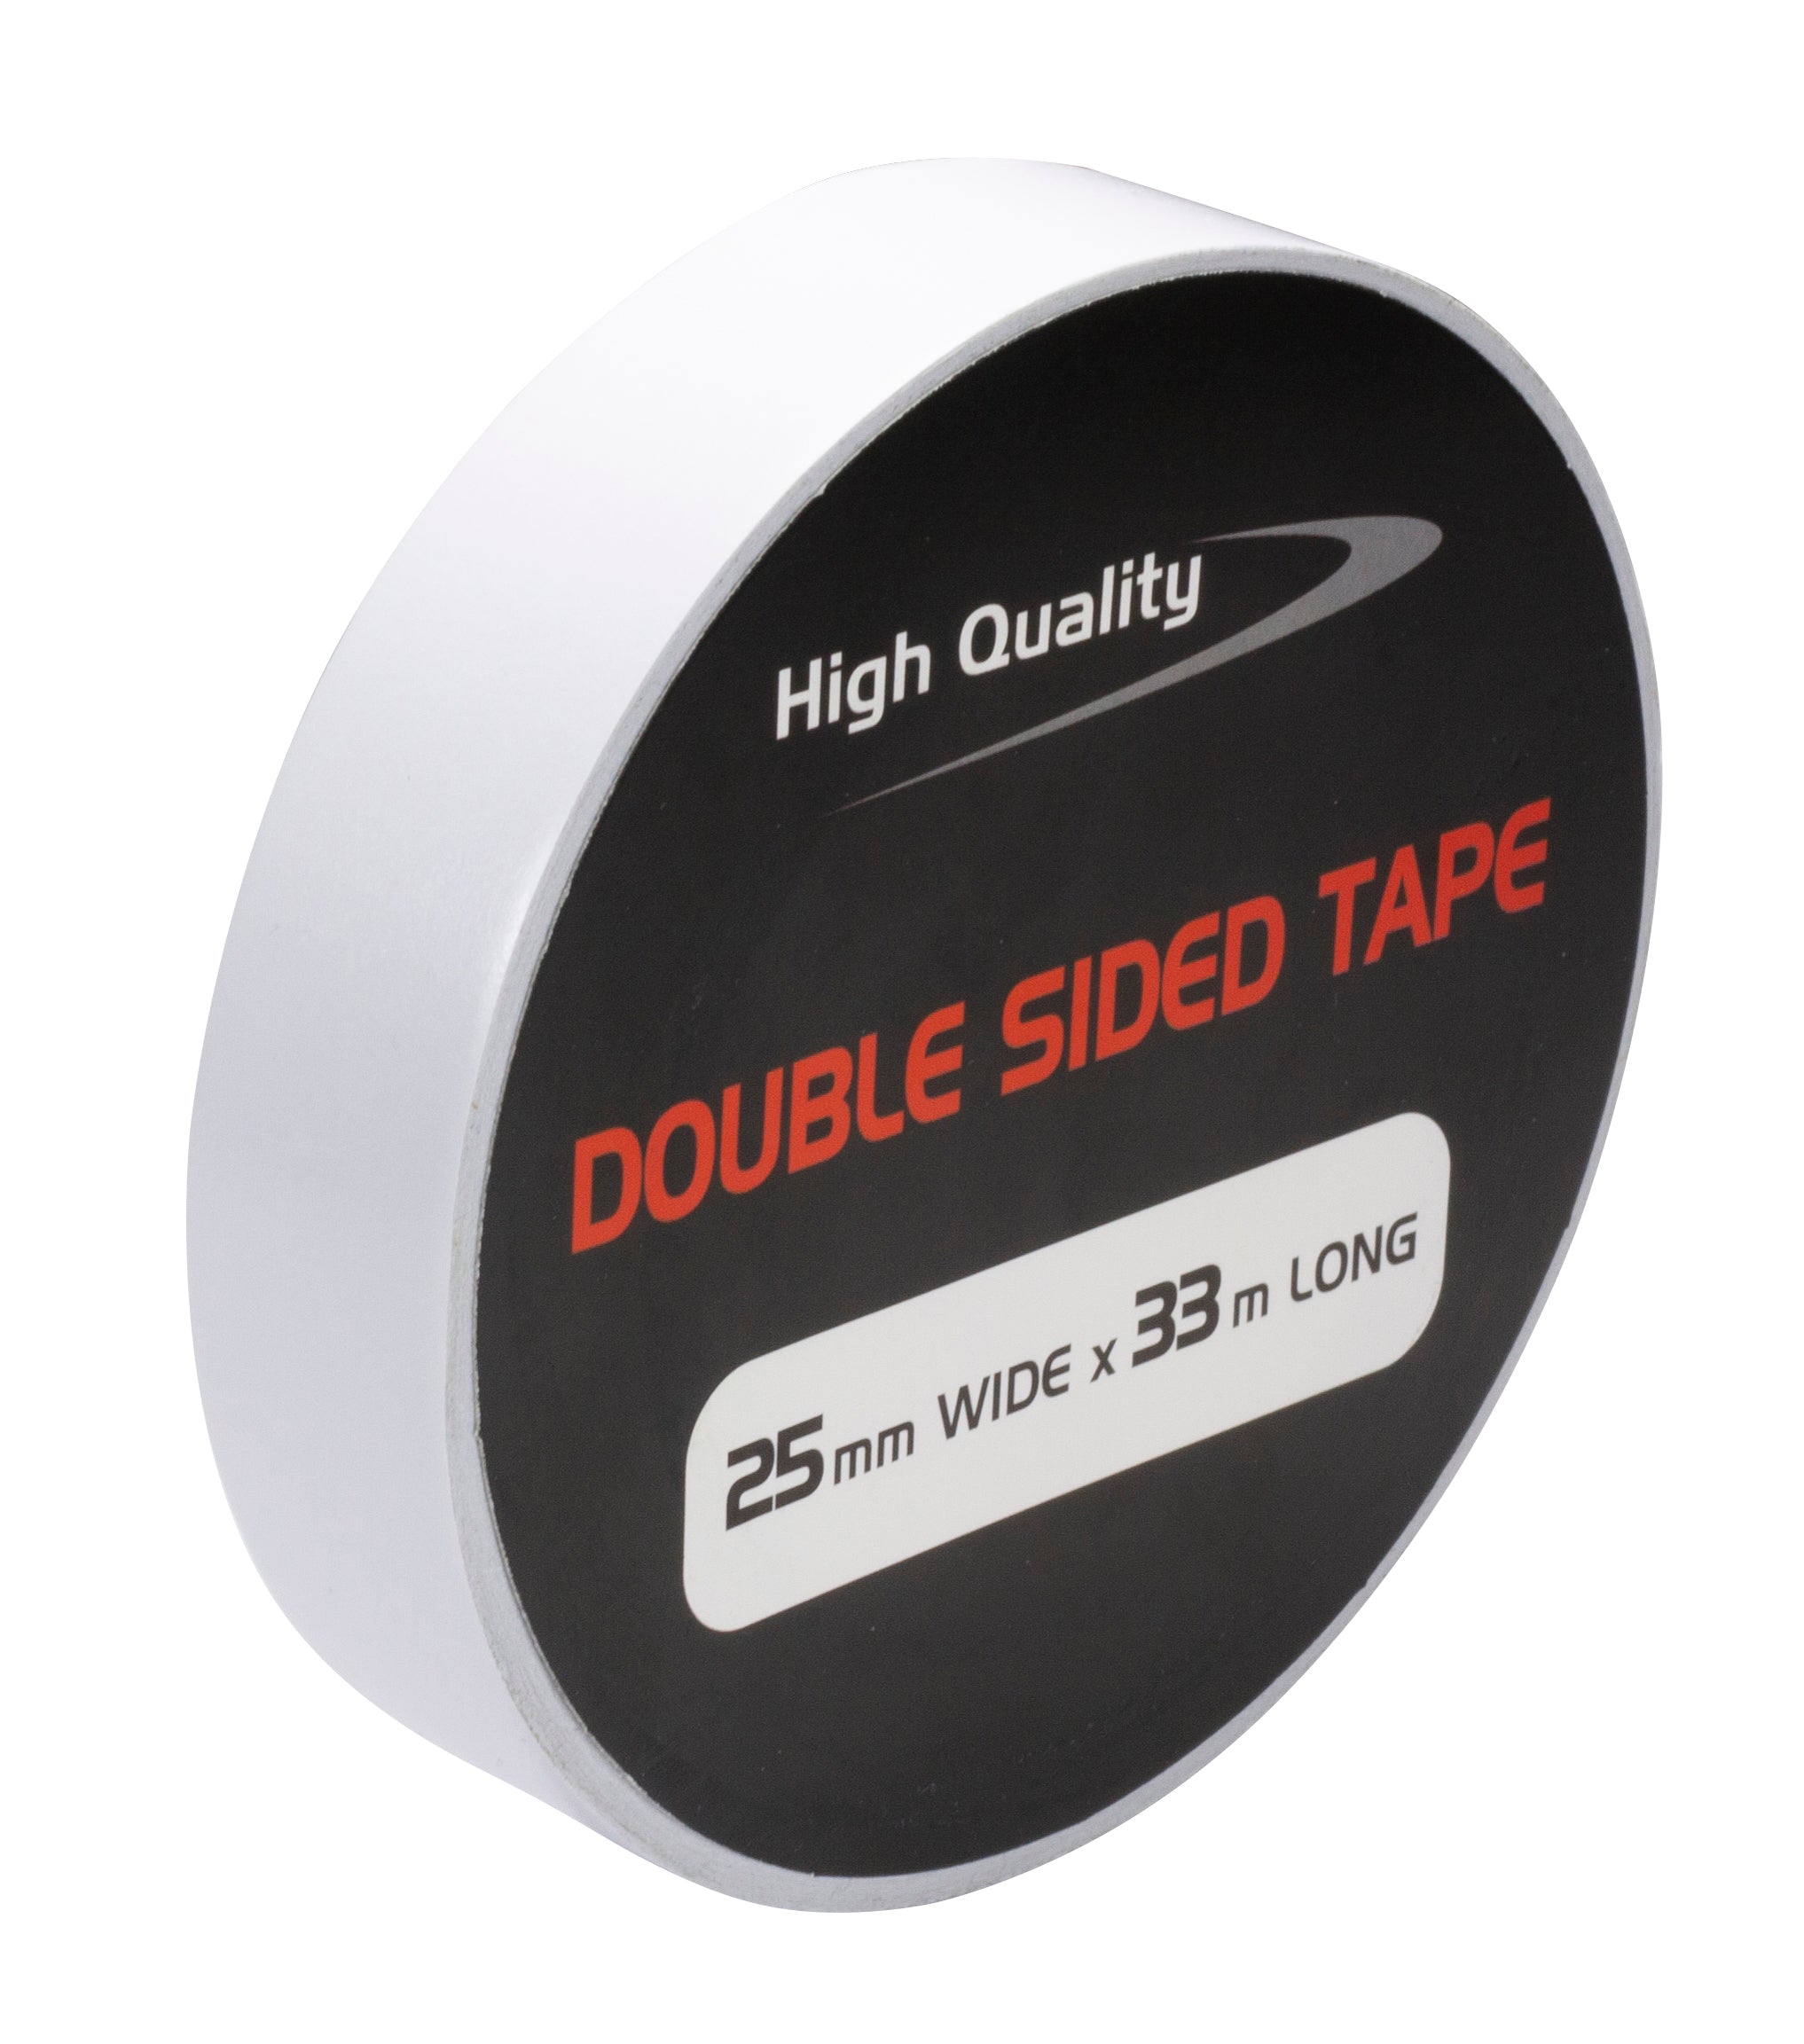 Double Sided Tape WHITE 25mm x 33m x 0.16mm Thickness - Per Pack